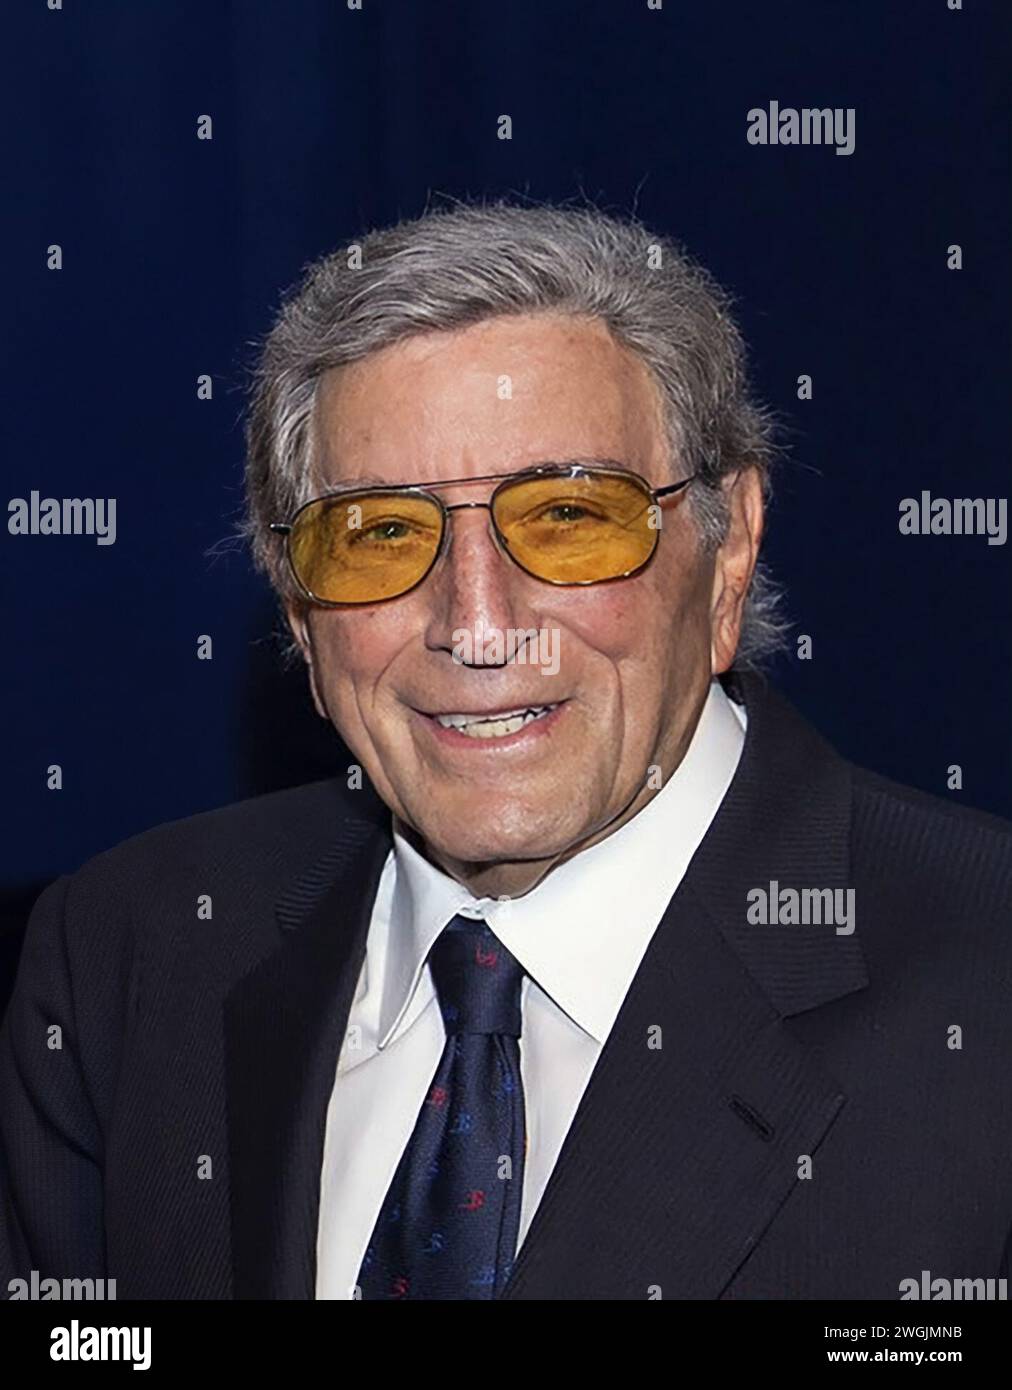 Tony Bennett. Portrait of the American singer, Anthony Dominick Benedetto (1926-2023) Stock Photo